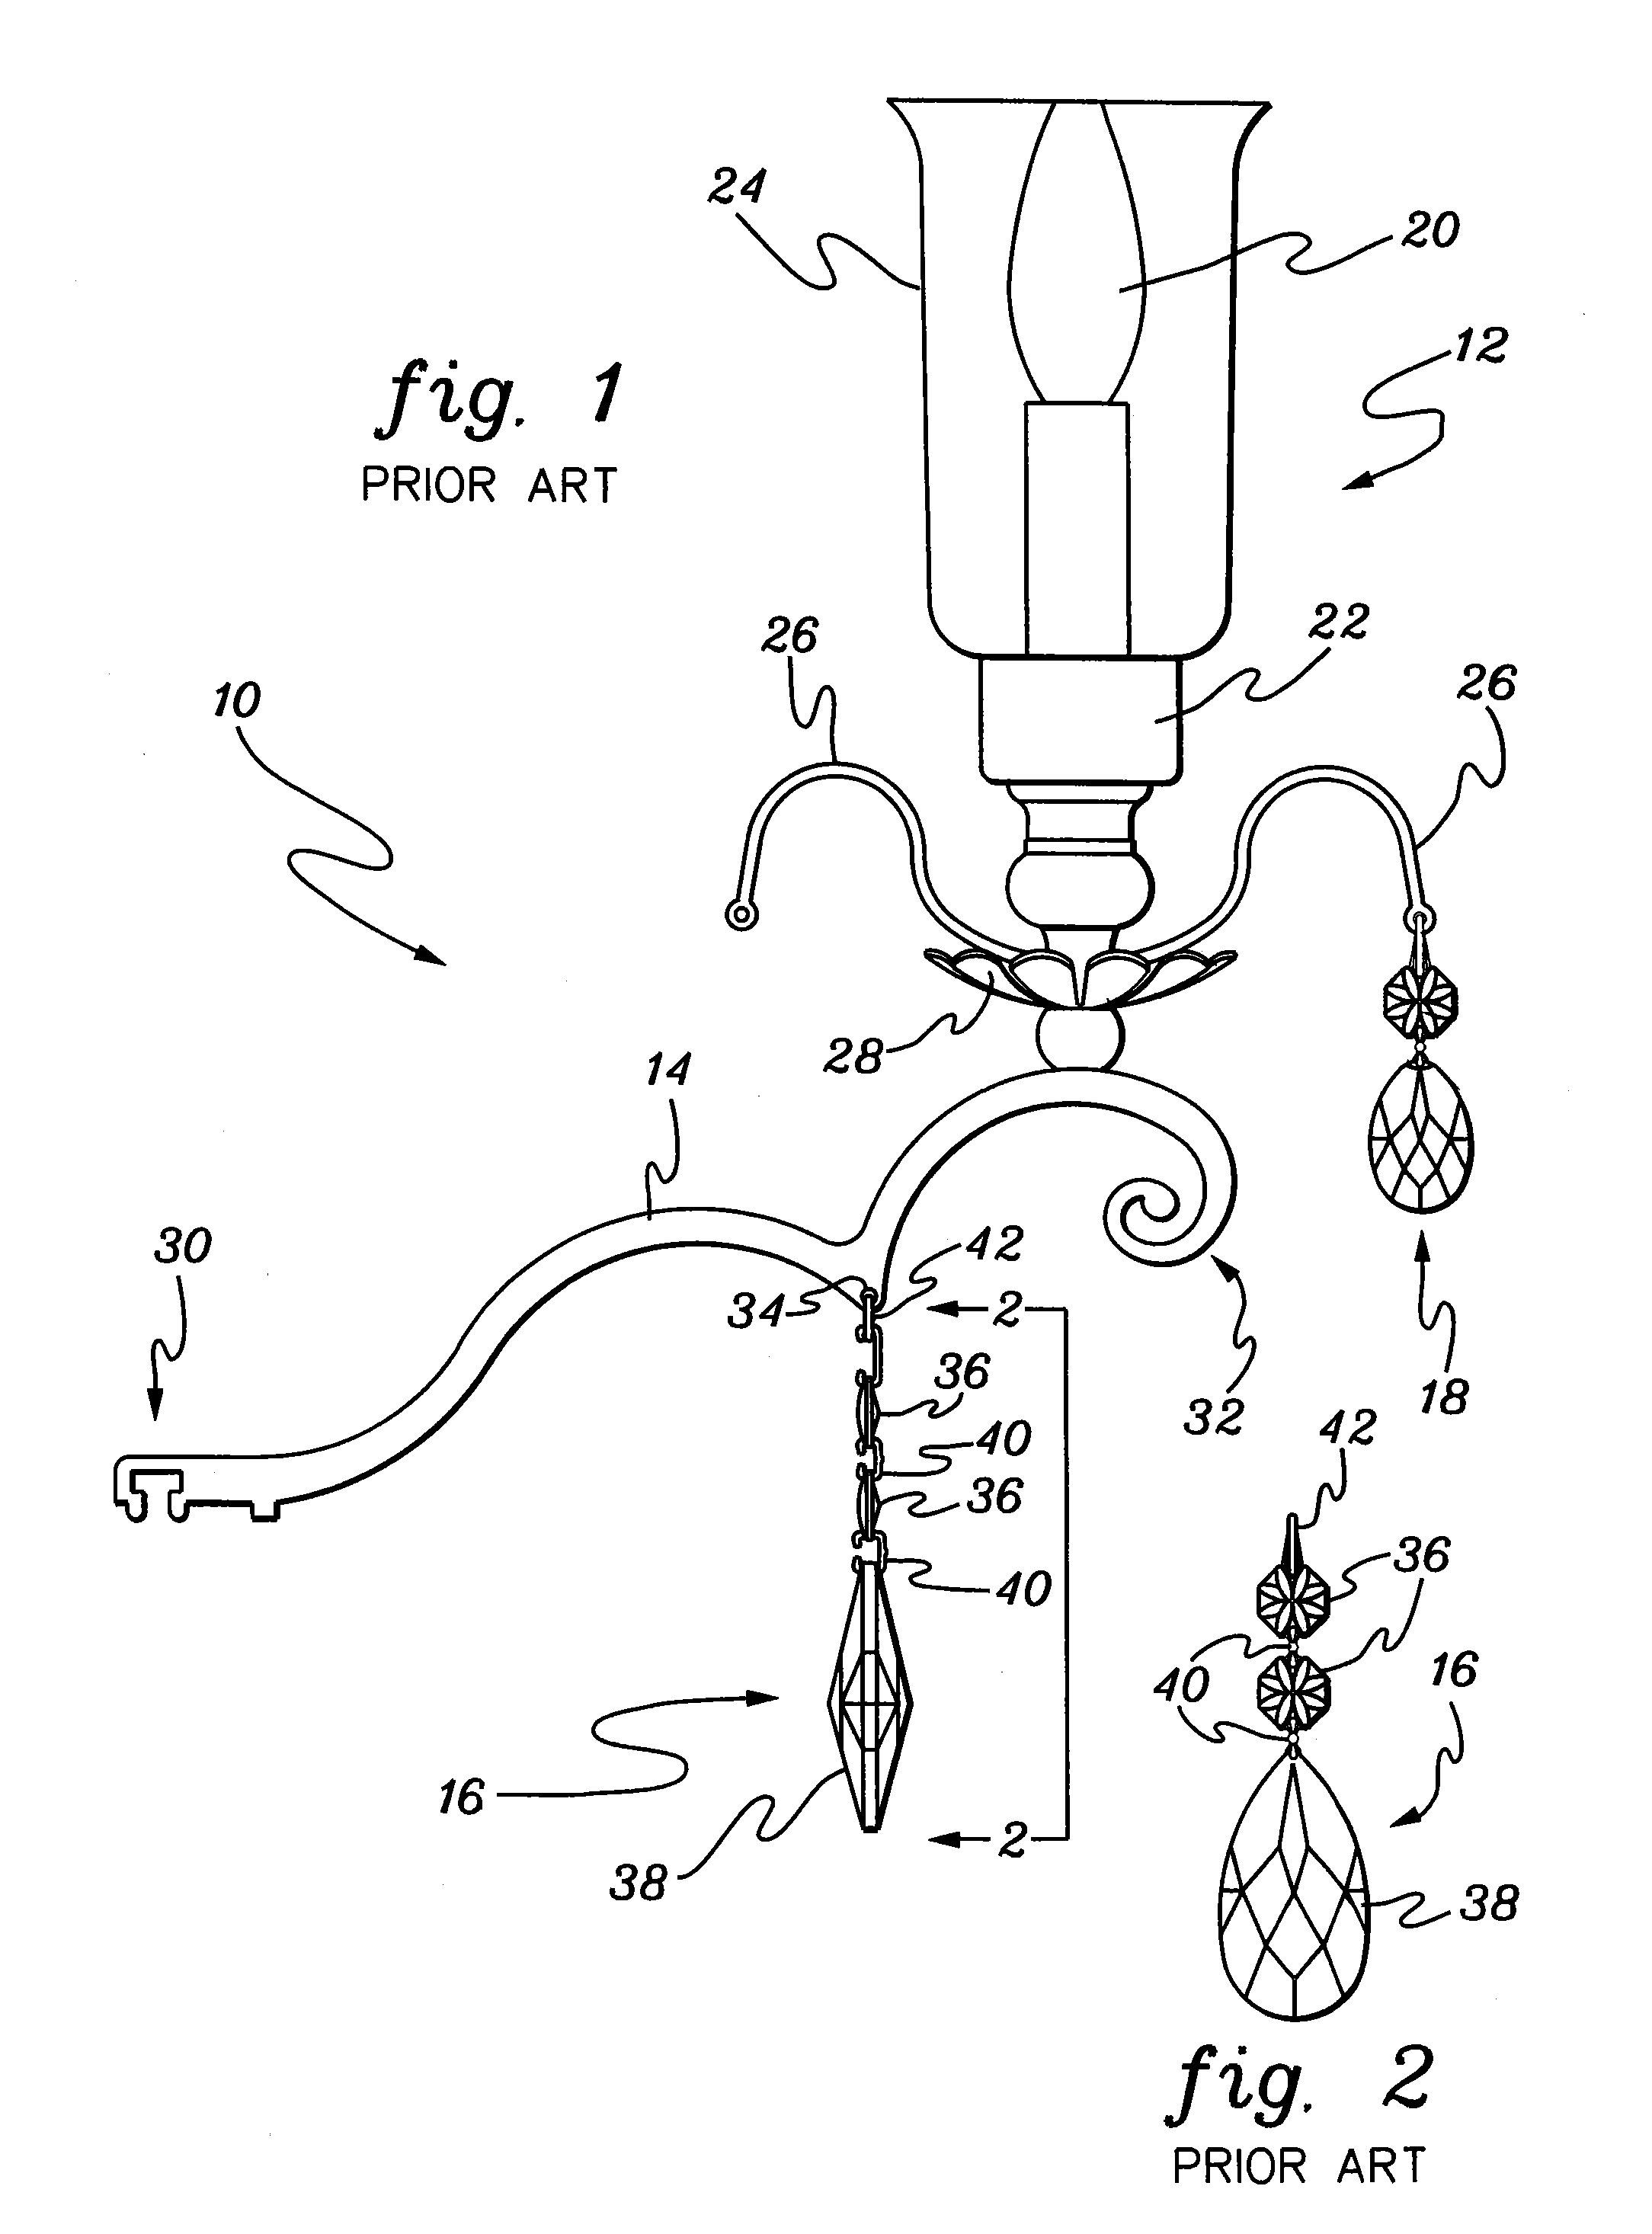 Devices and methods for displaying decorative ornaments